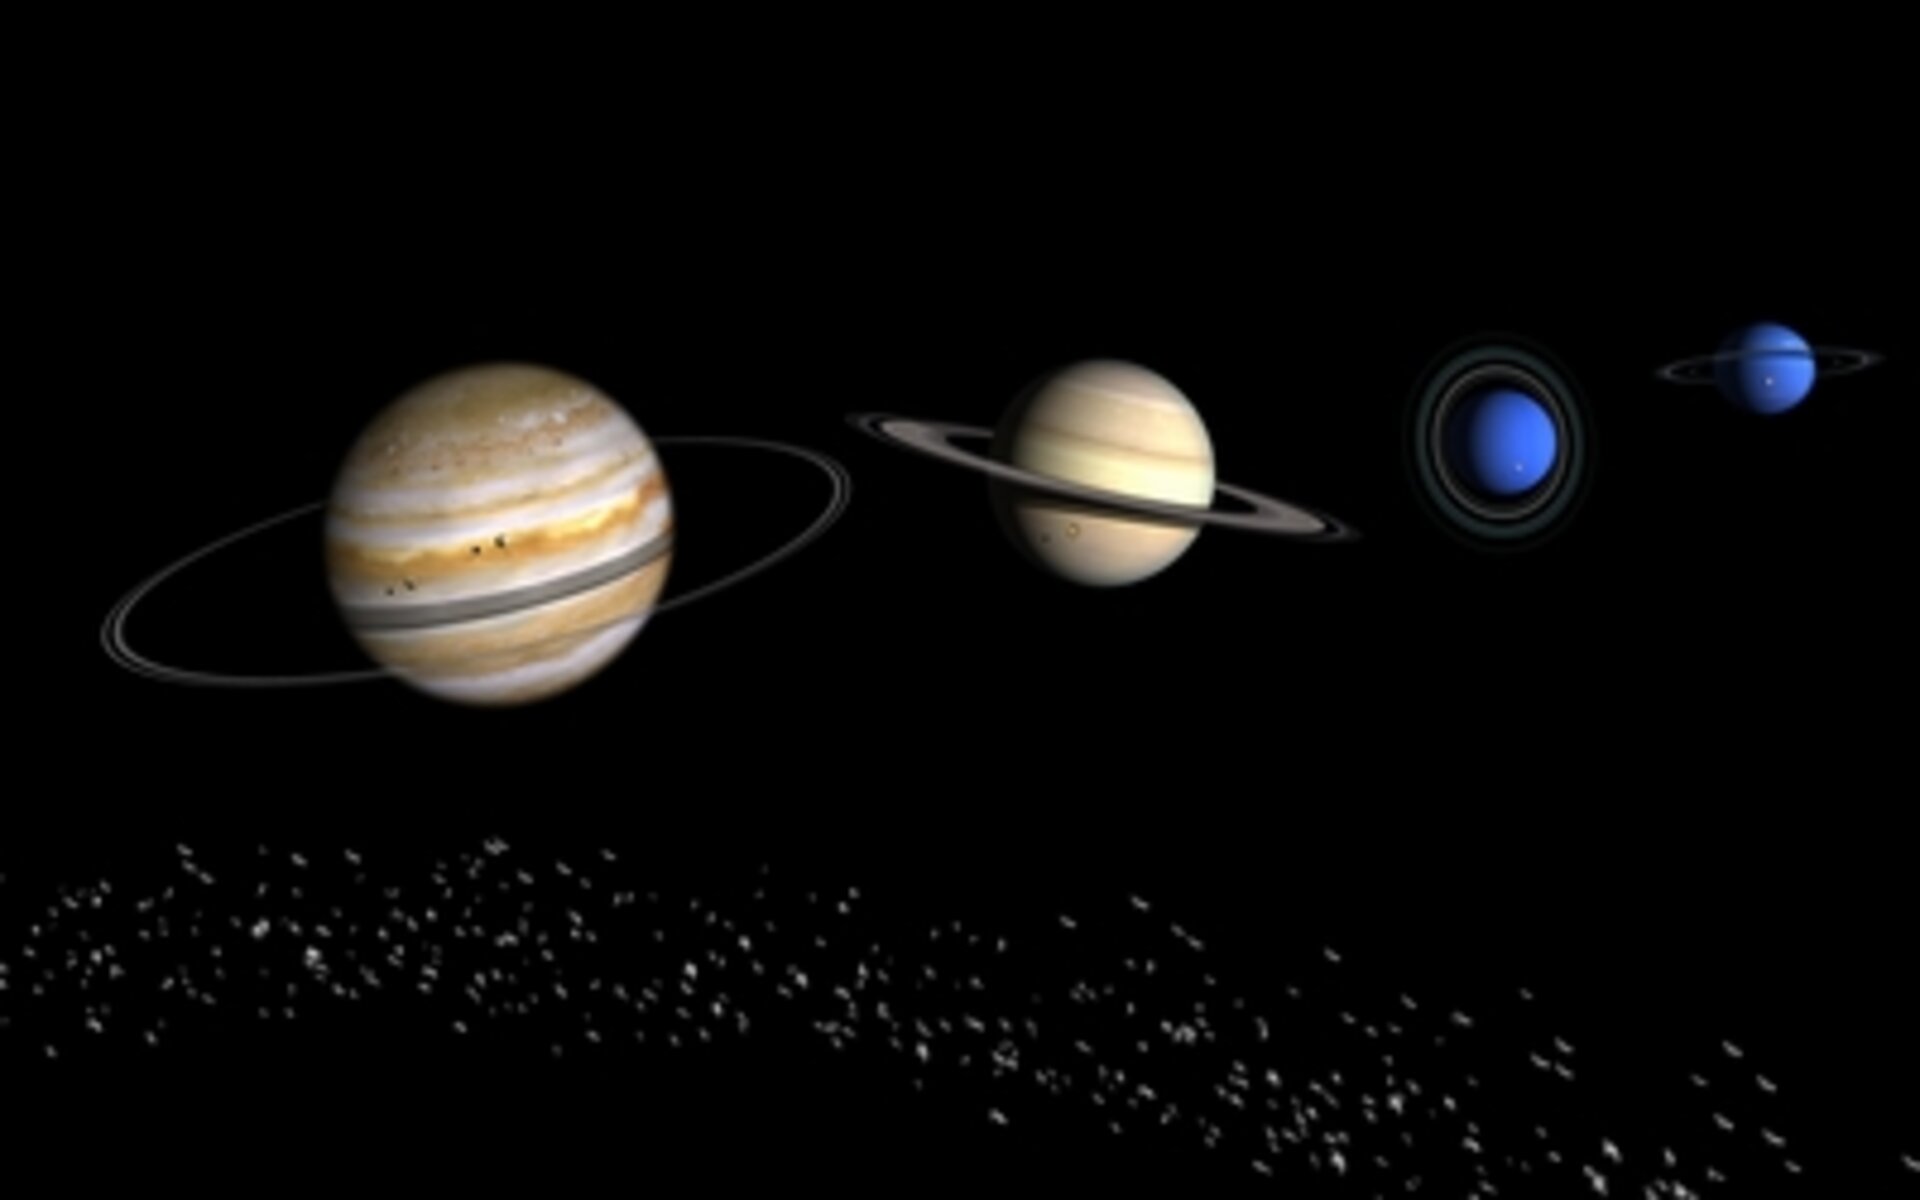 The gas giant planets. Artist's view.